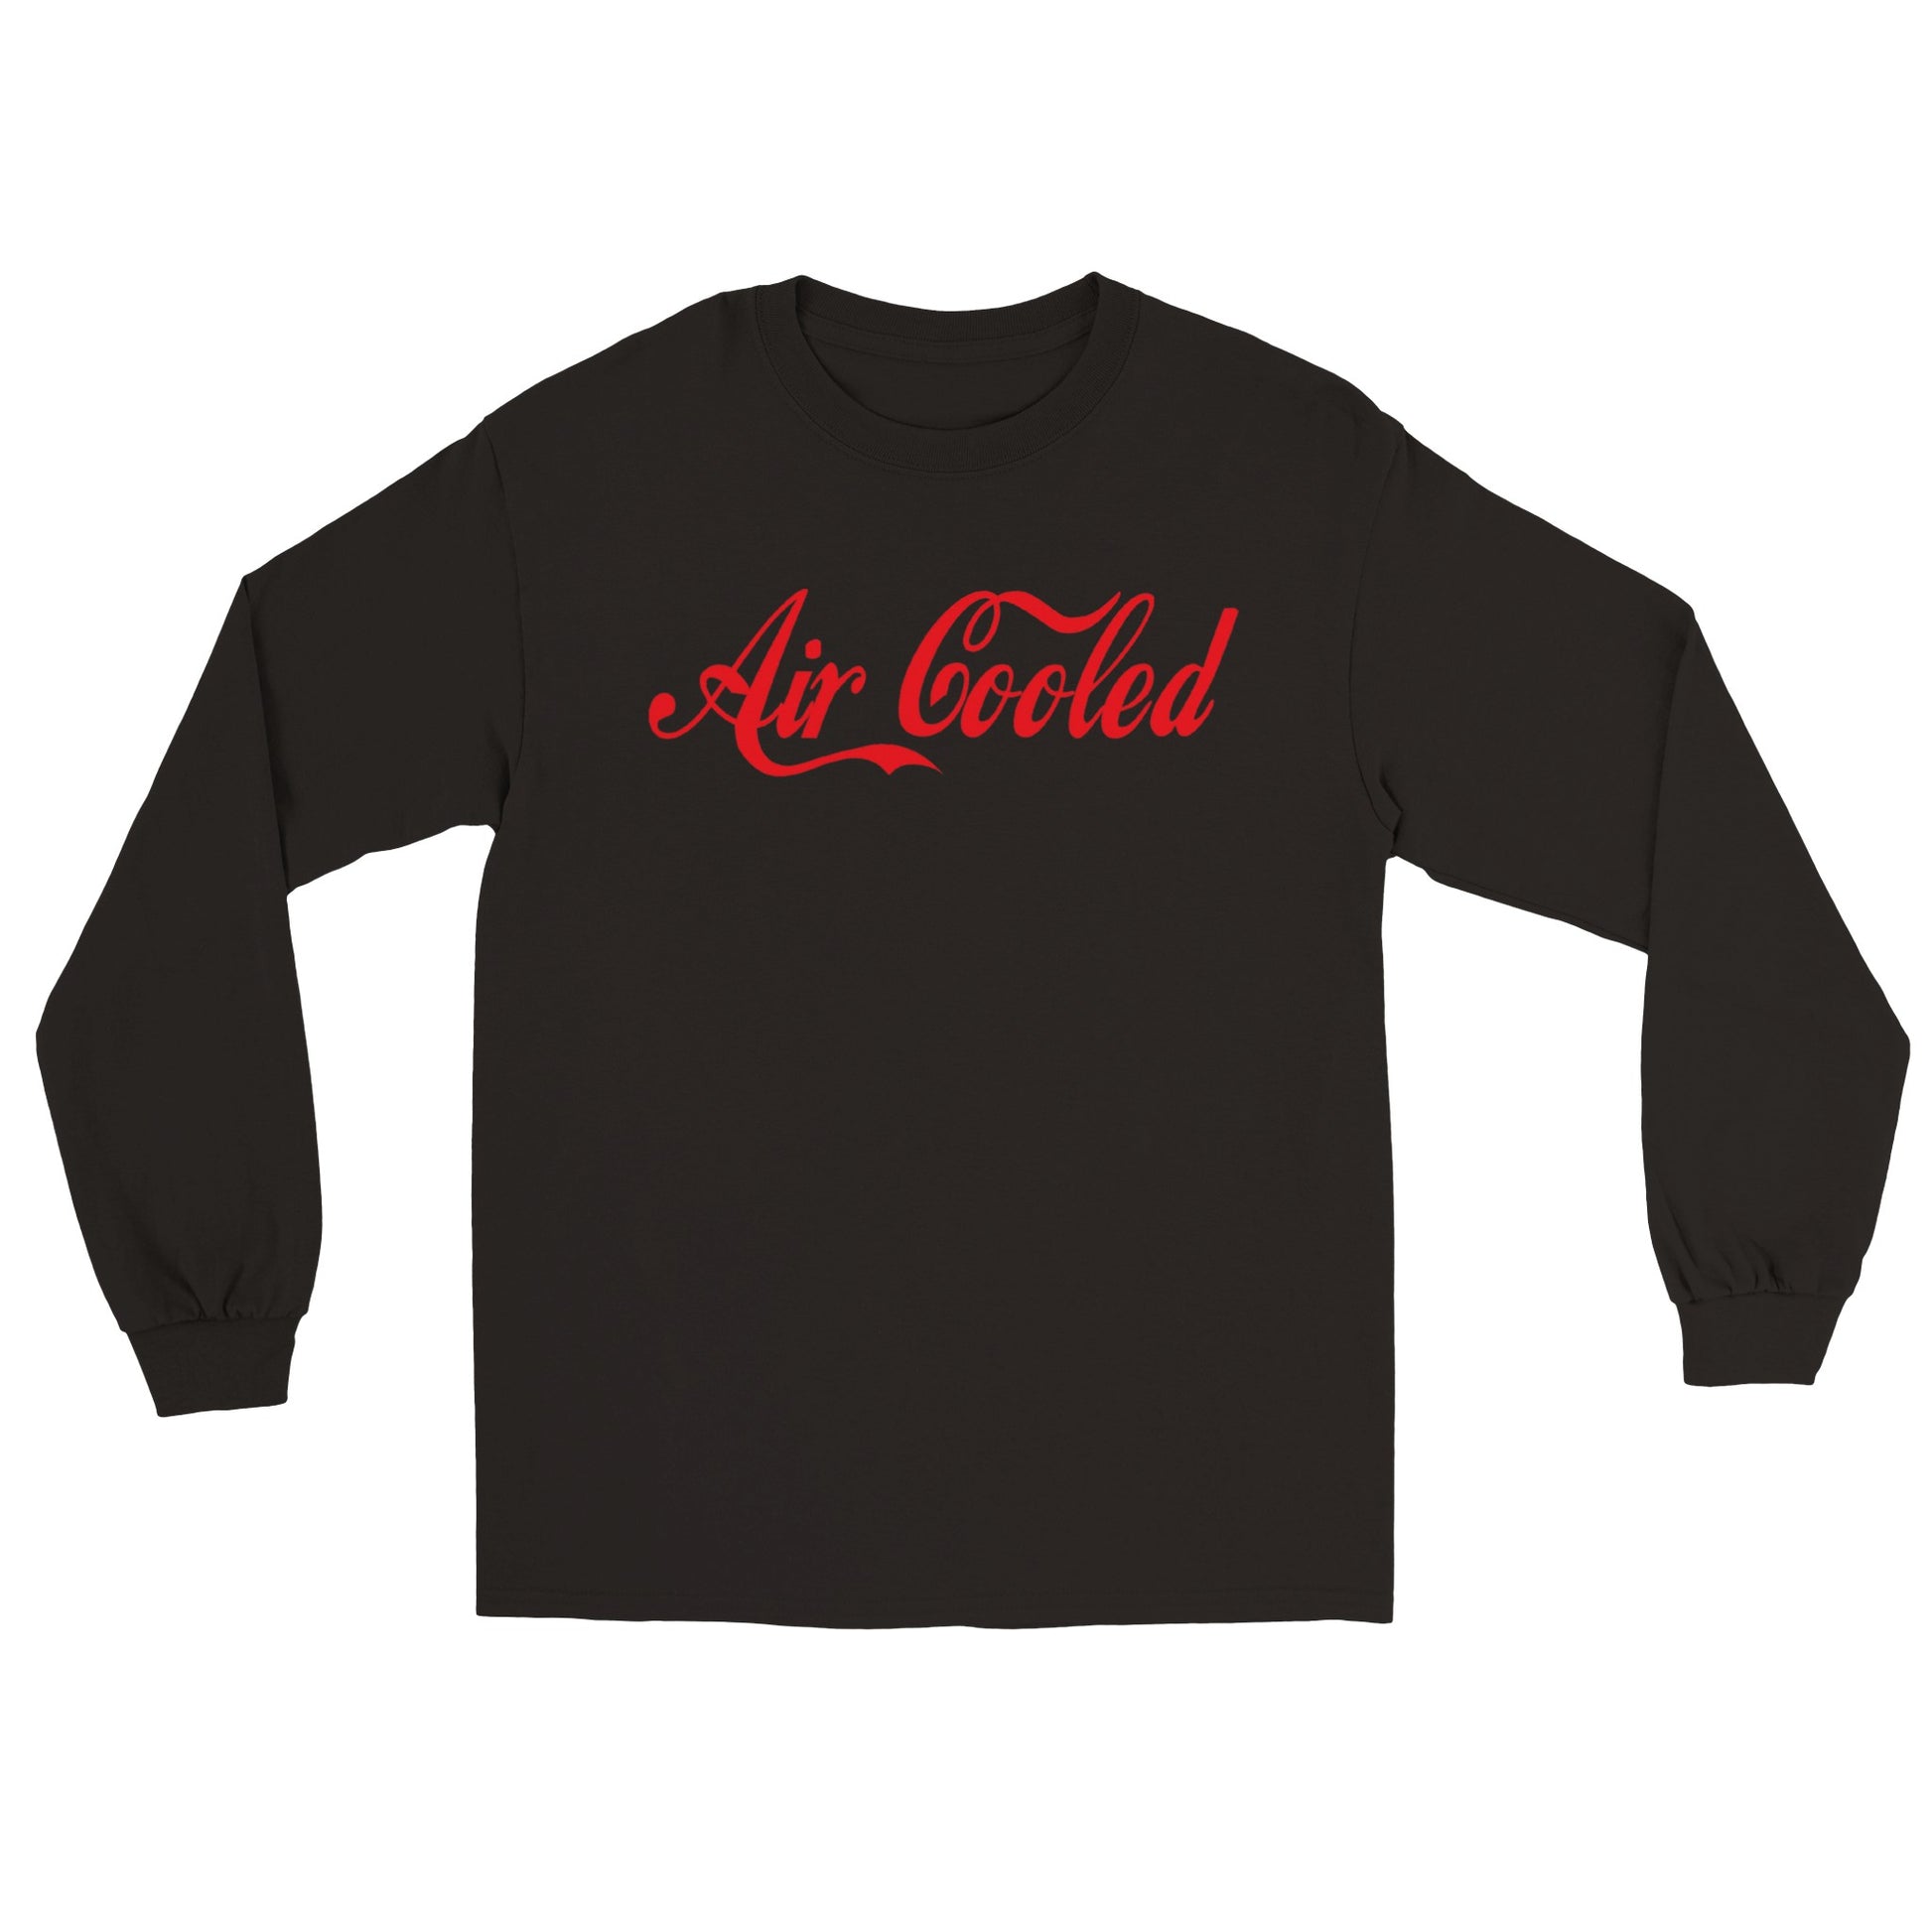 Air Cooled - Classic Unisex Longsleeve T-shirt - Mister Snarky's